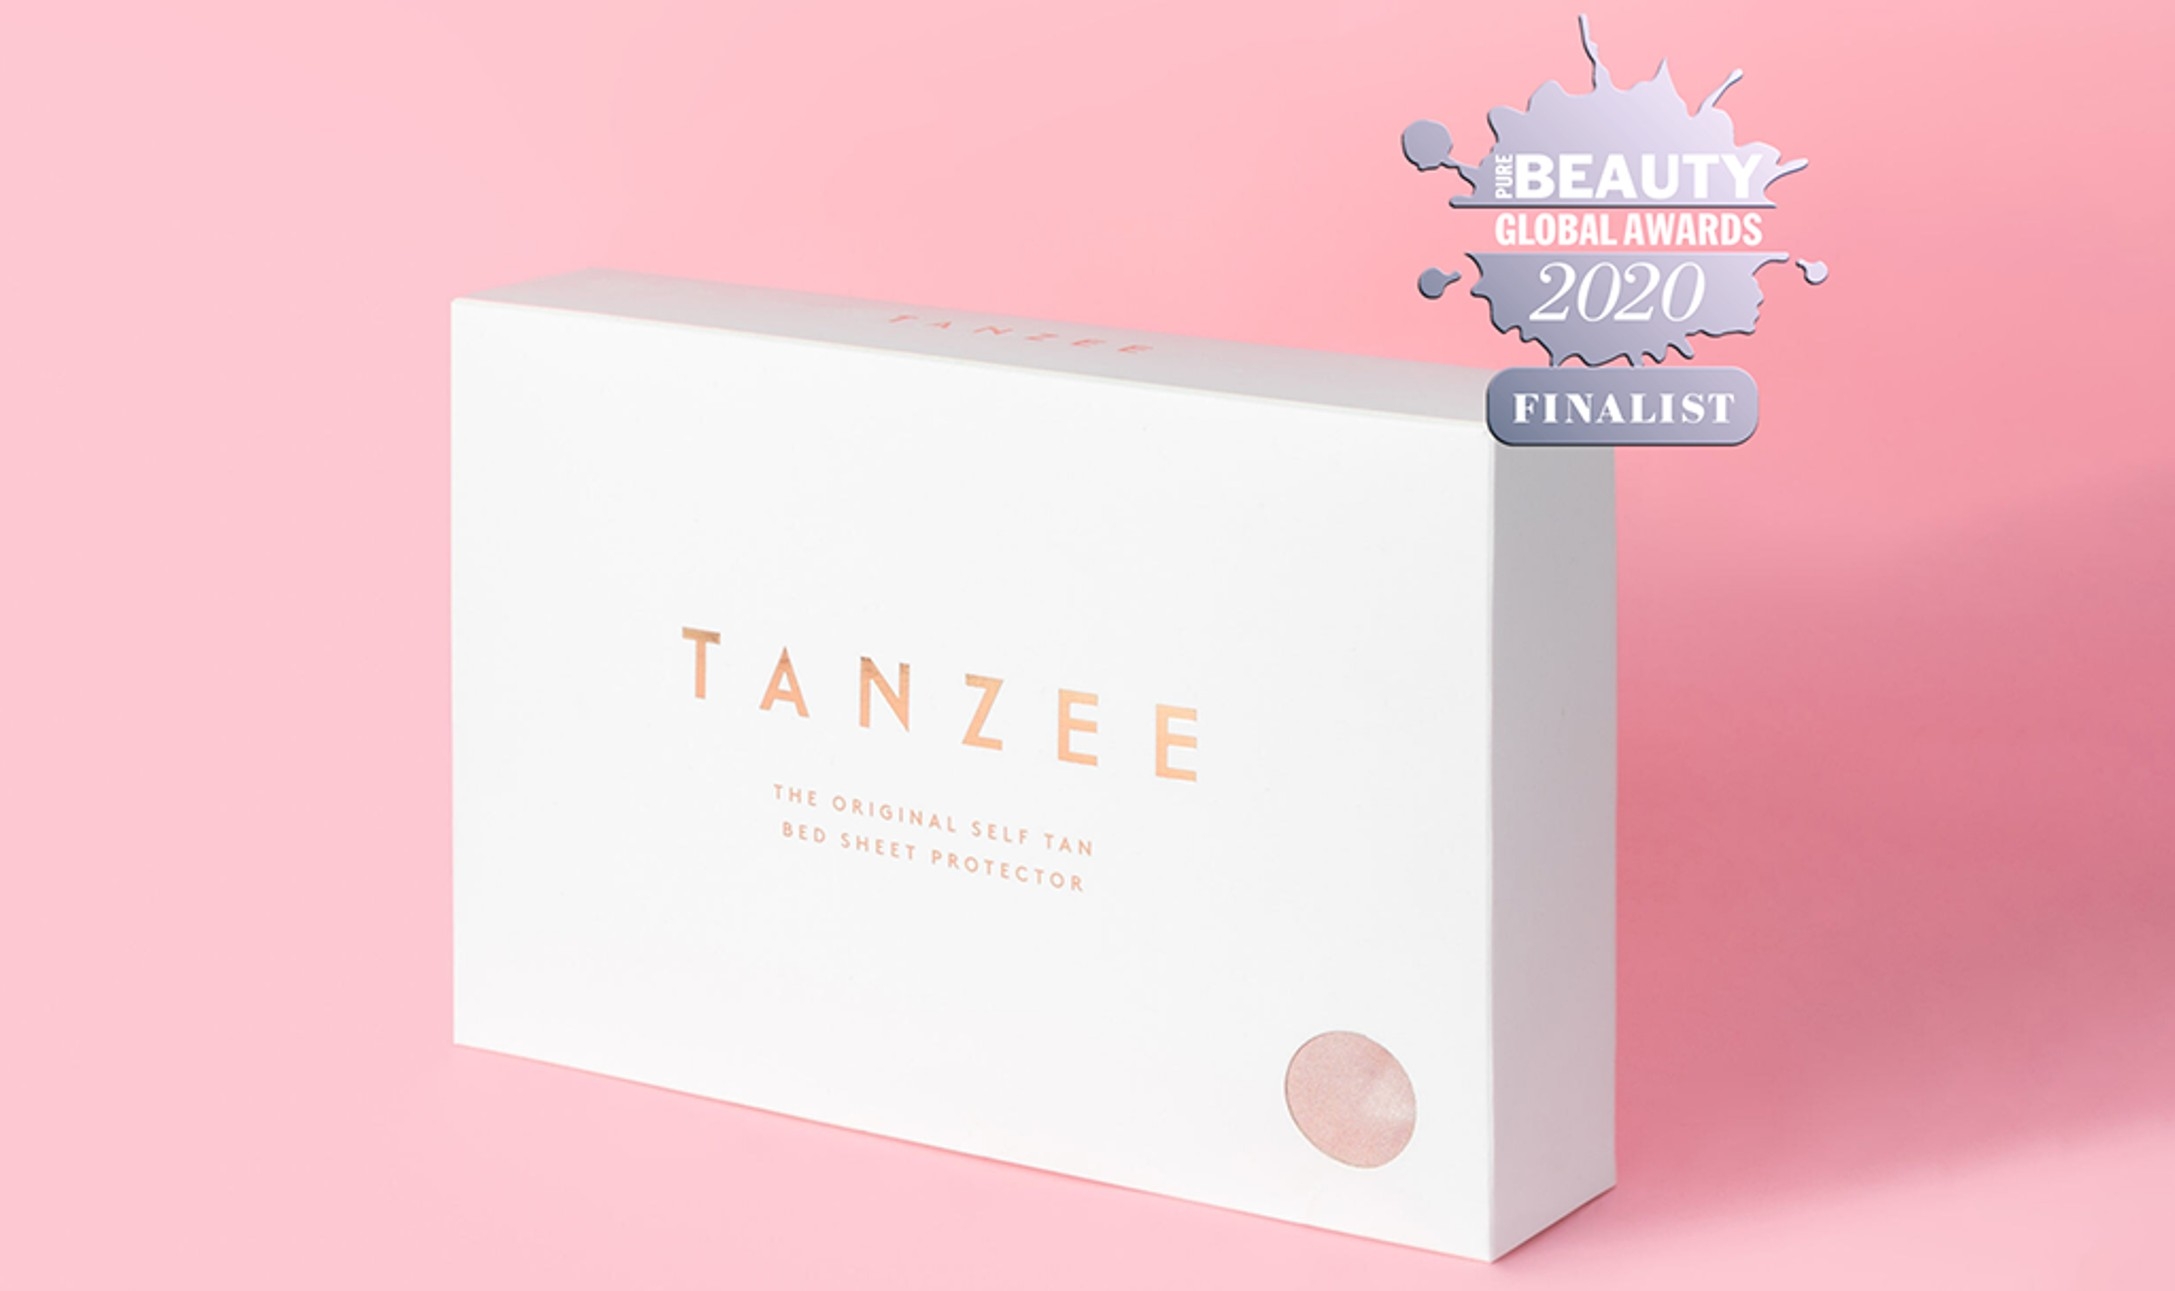 Tanzee is a scaling eCommerce brand that is taking the world by storm one tanning routine product at a time.